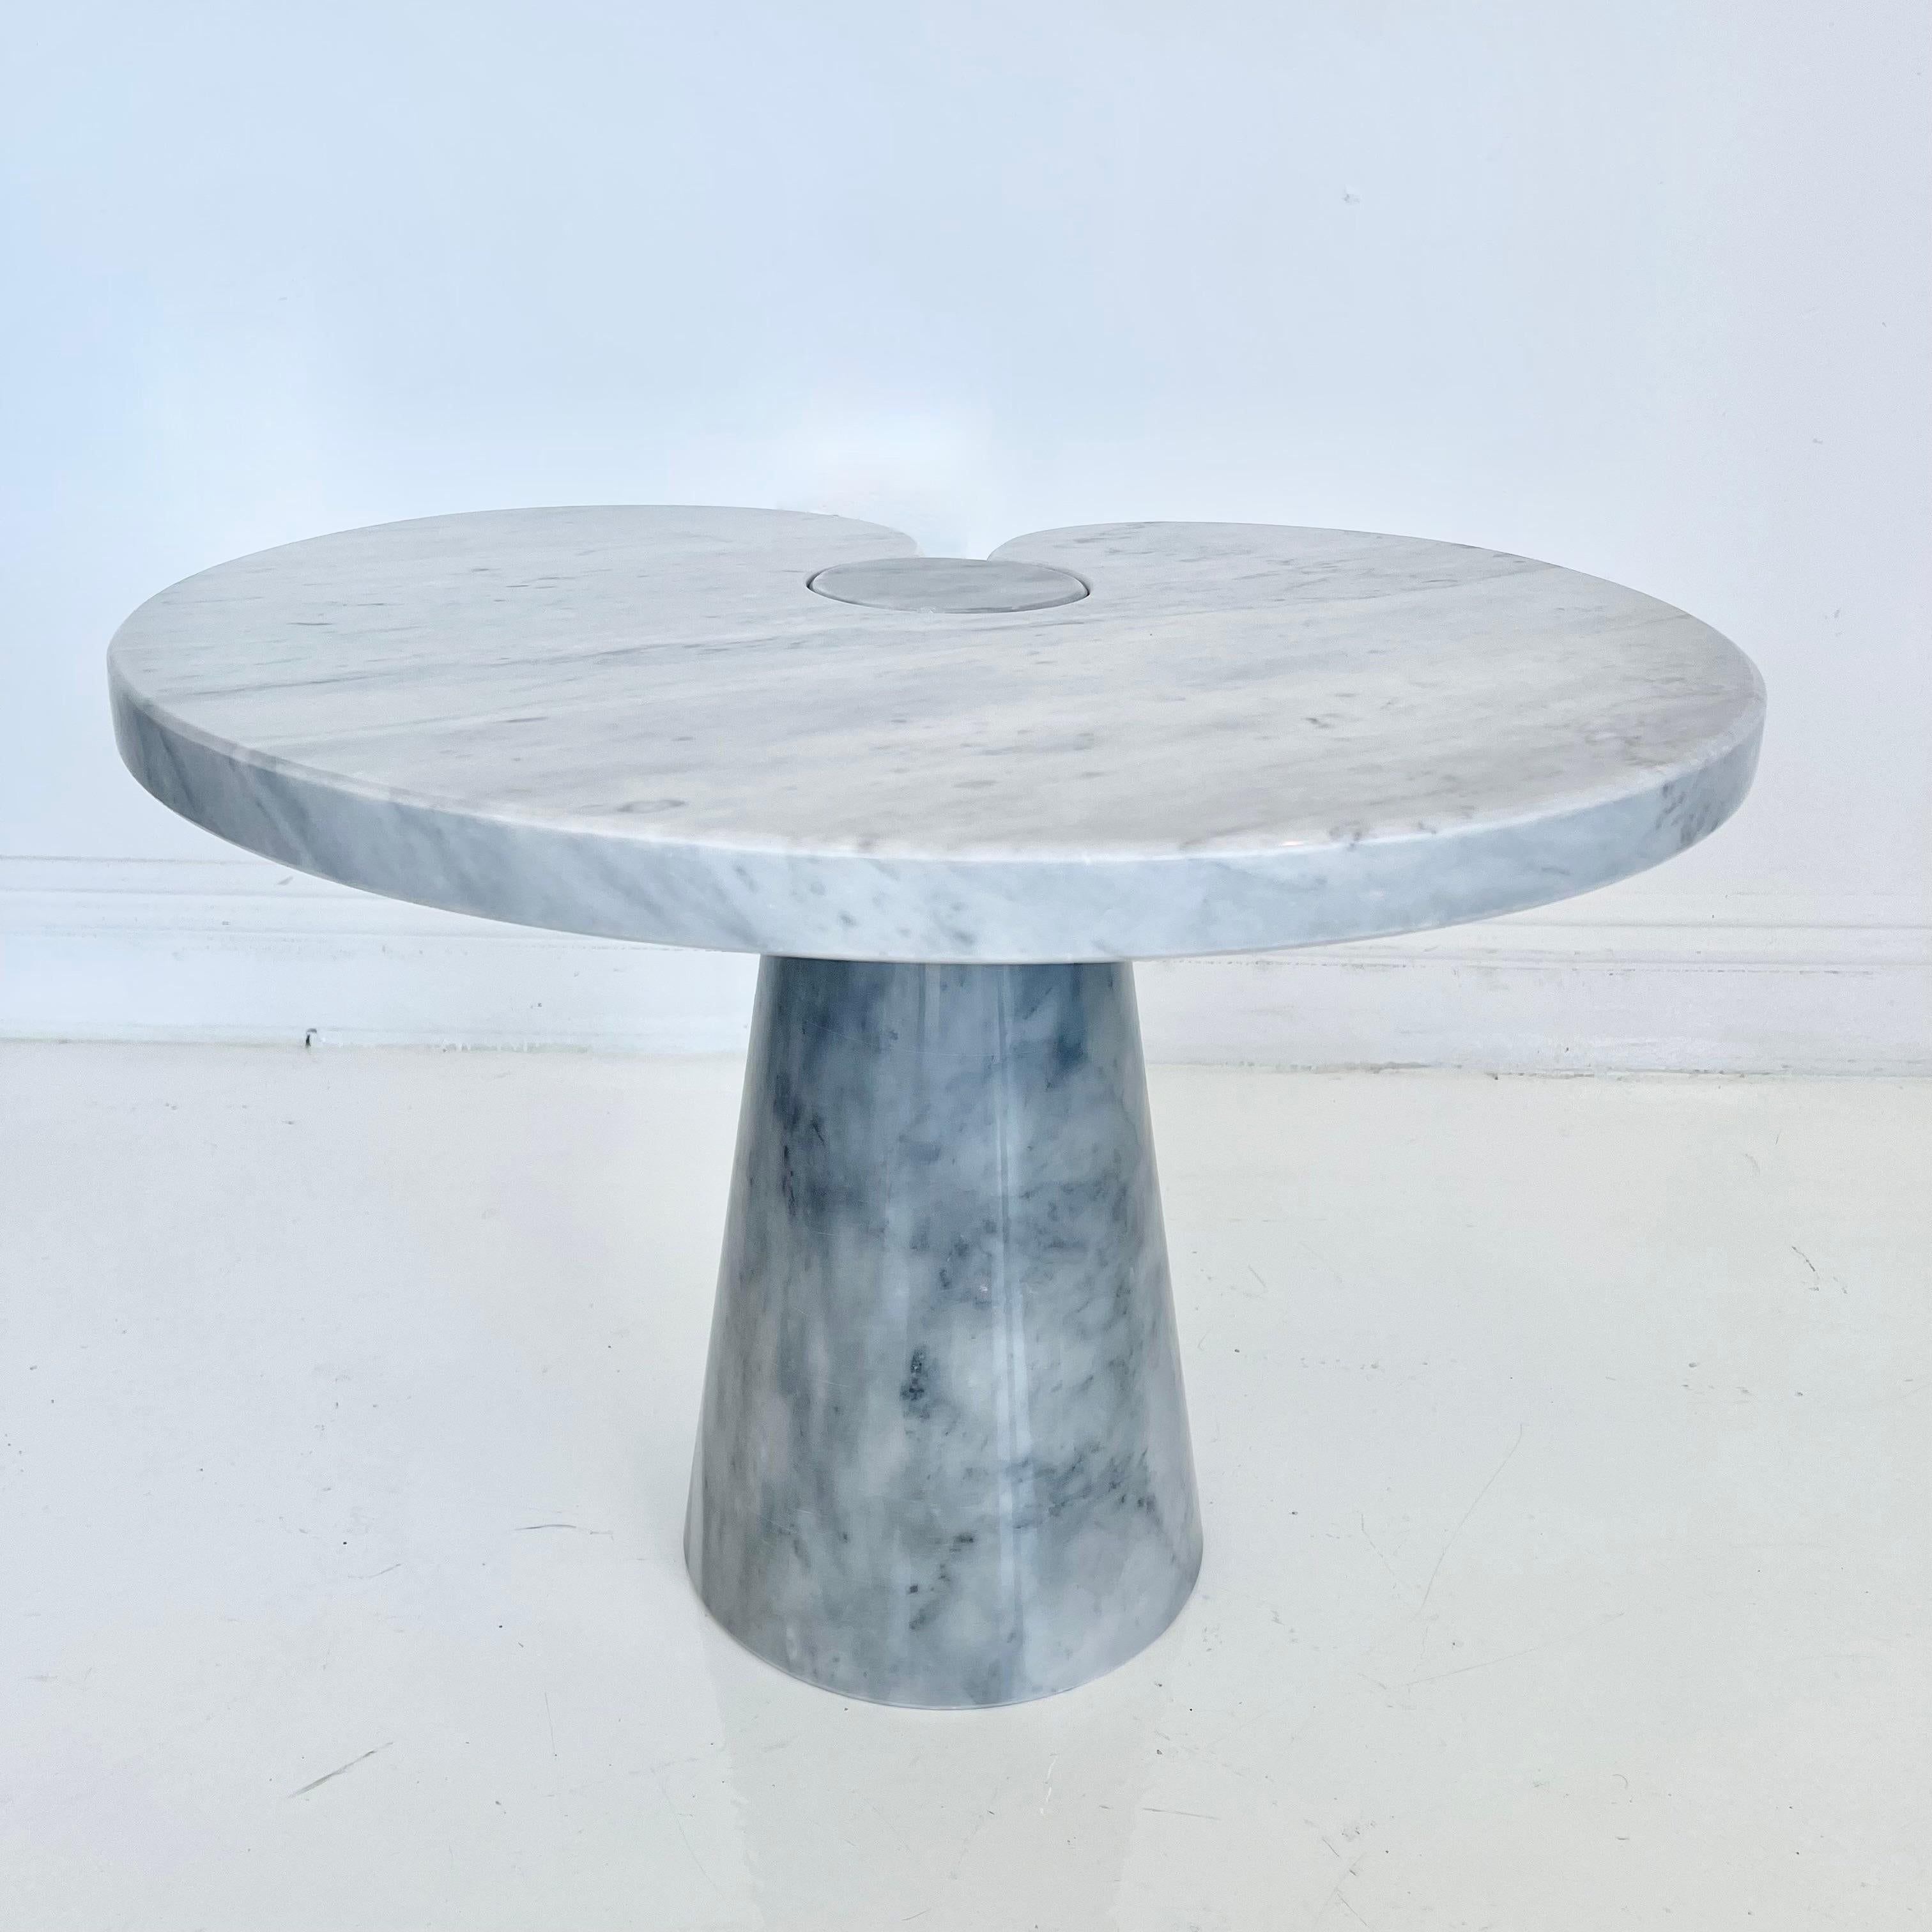 Stunning Carrara marble side table designed by Angelo Mangiarotti for Skipper in the 1970s. Large cone shaped base holds a large water lily shaped slab of marble with a circular cut out which fits around the top of the base. Extremely heavy and well